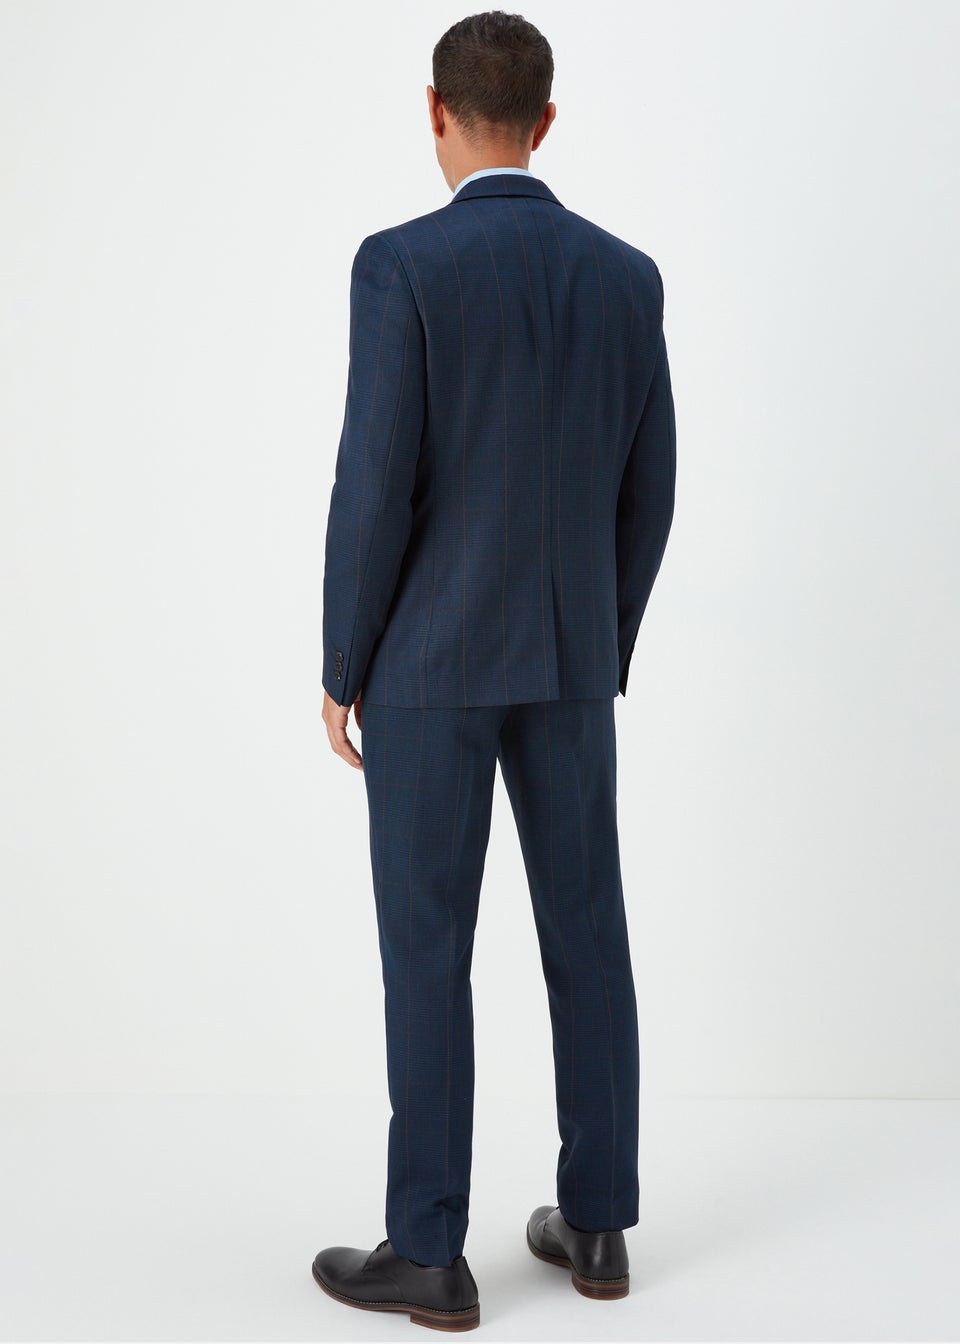 Taylor & Wright Westminster Navy Skinny Fit Suit Jacket